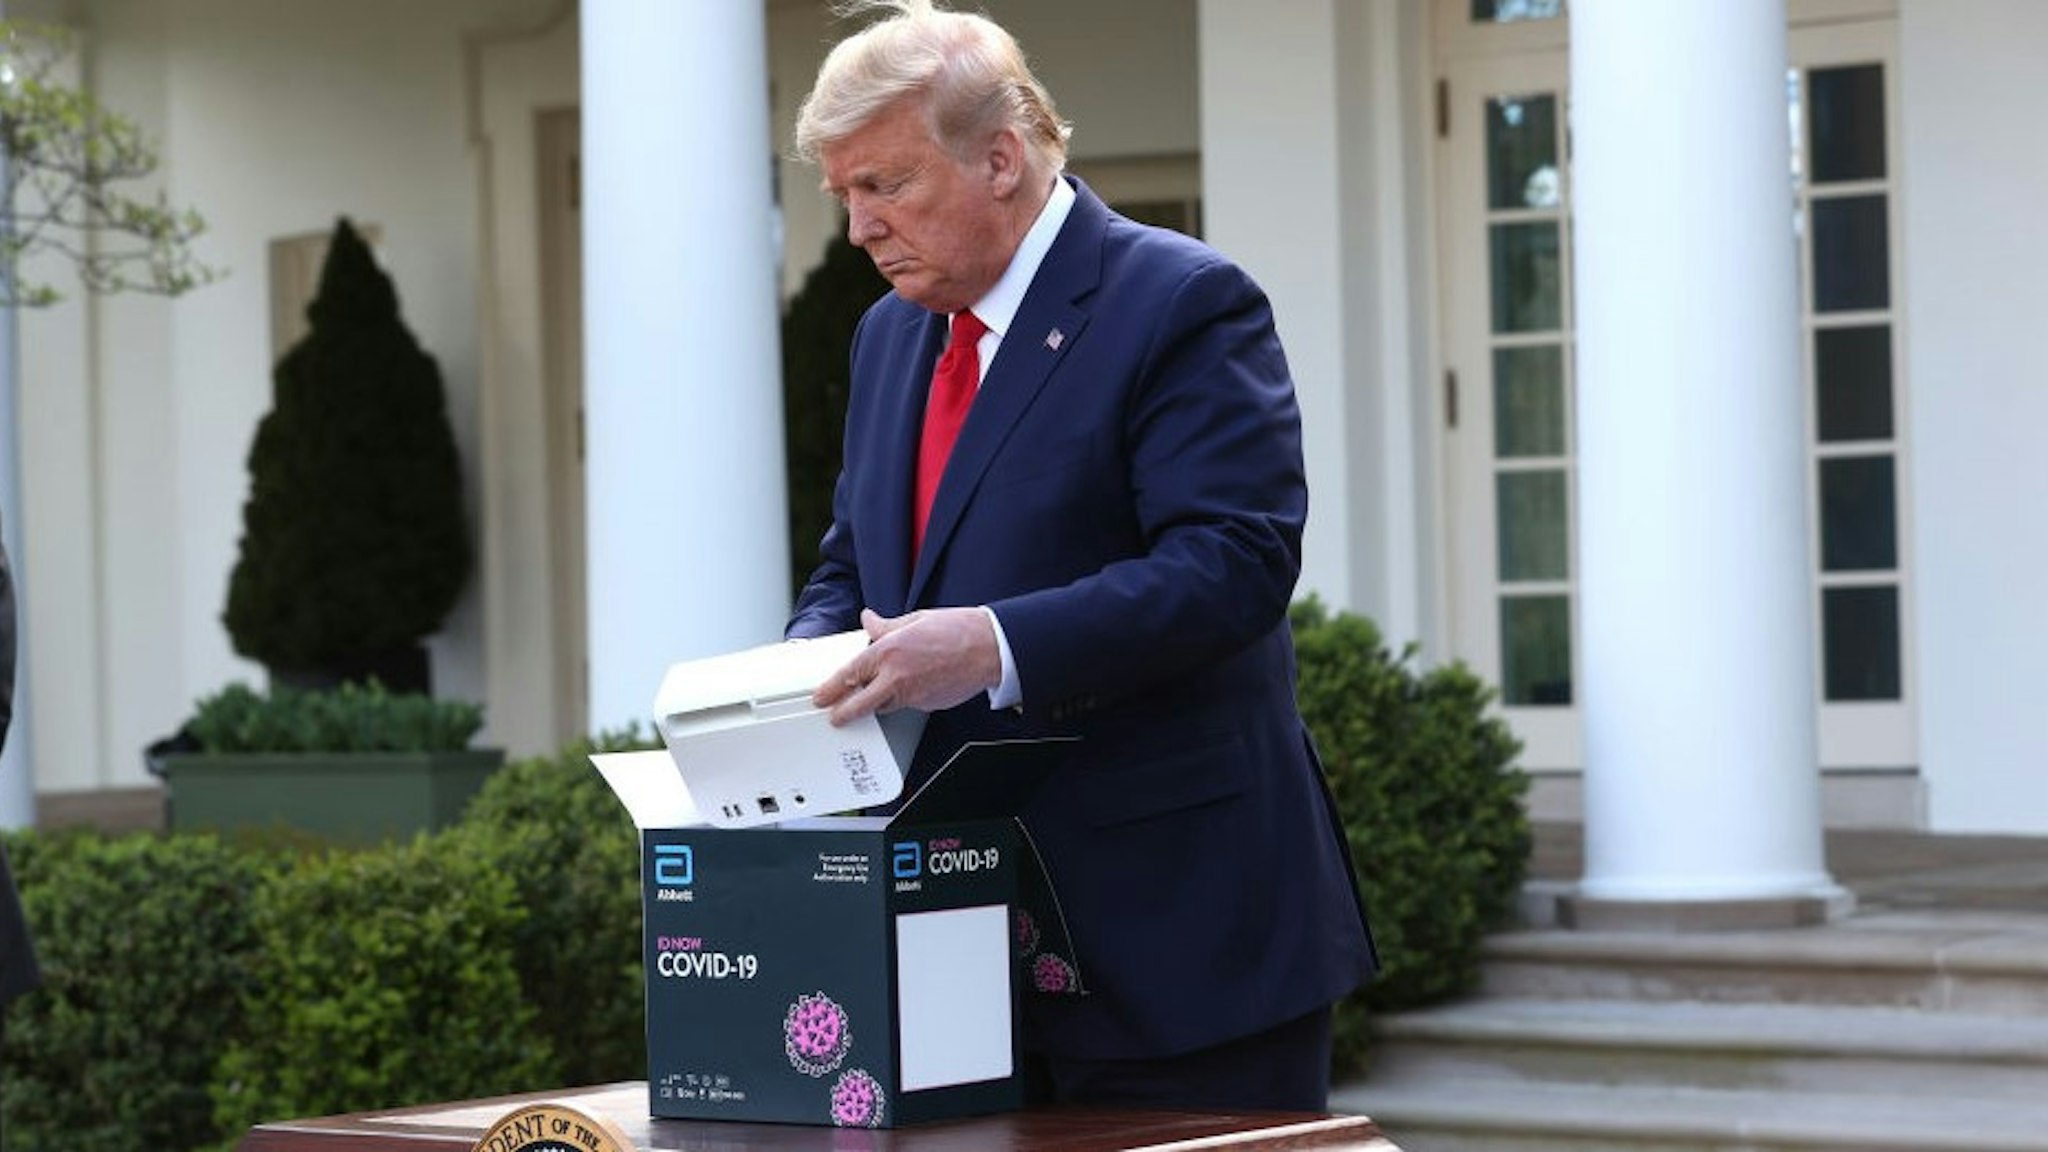 WASHINGTON, DC - MARCH 30: U.S. President Donald Trump takes a new COVID-19 test kit developed by Abbott Labs out of its box during the daily coronavirus briefing at the Rose Garden of the White House on March 30, 2020 in Washington, DC. The United States has updated its guidelines to U.S. citizens to maintain current social distancing practices through the end of April after the number of reported coronavirus (COVID-19) deaths doubled to over 2,000 nationwide within two days. (Photo by